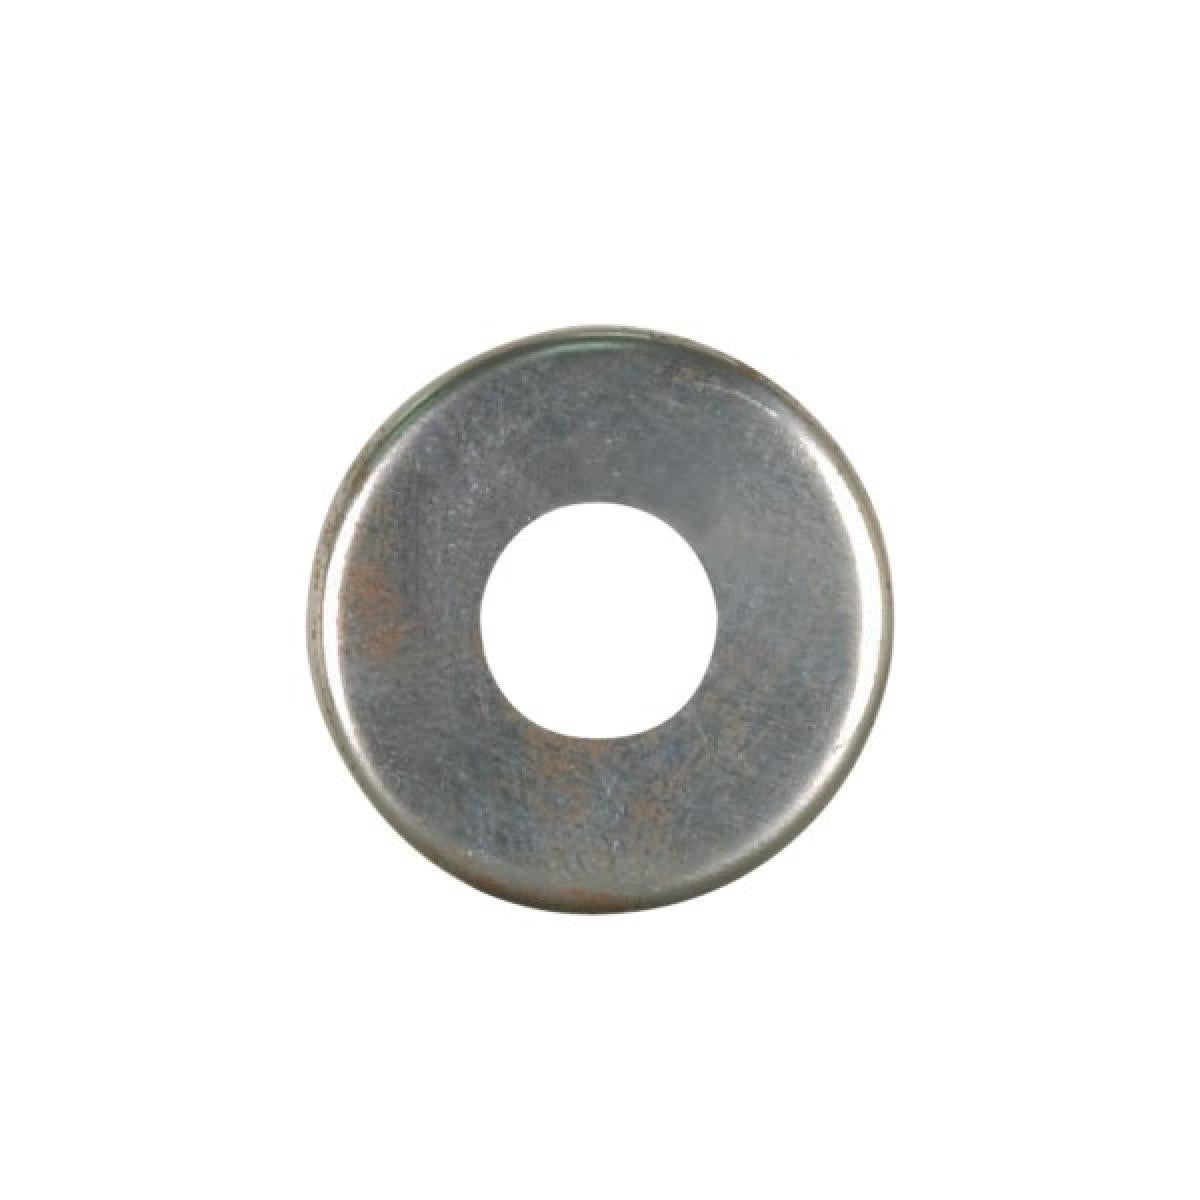 Satco 90-2058 Steel Check Ring Curled Edge 1/8 IP Slip Unfinished 1-1/8" Diameter